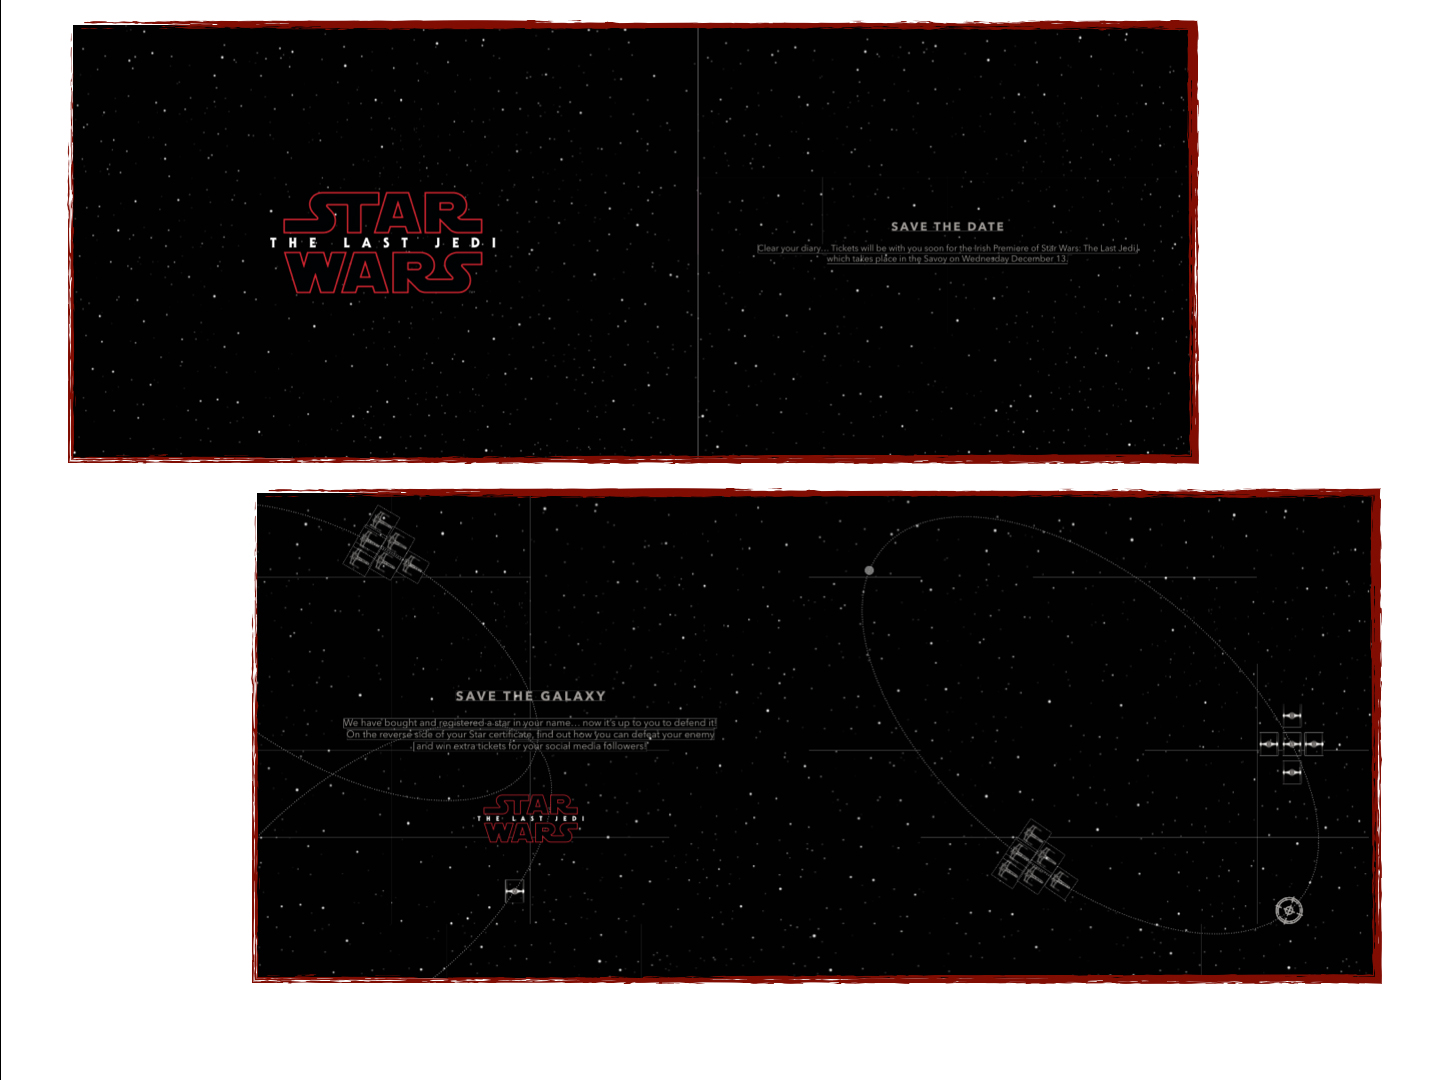 Star Wars Invites - What invitees received